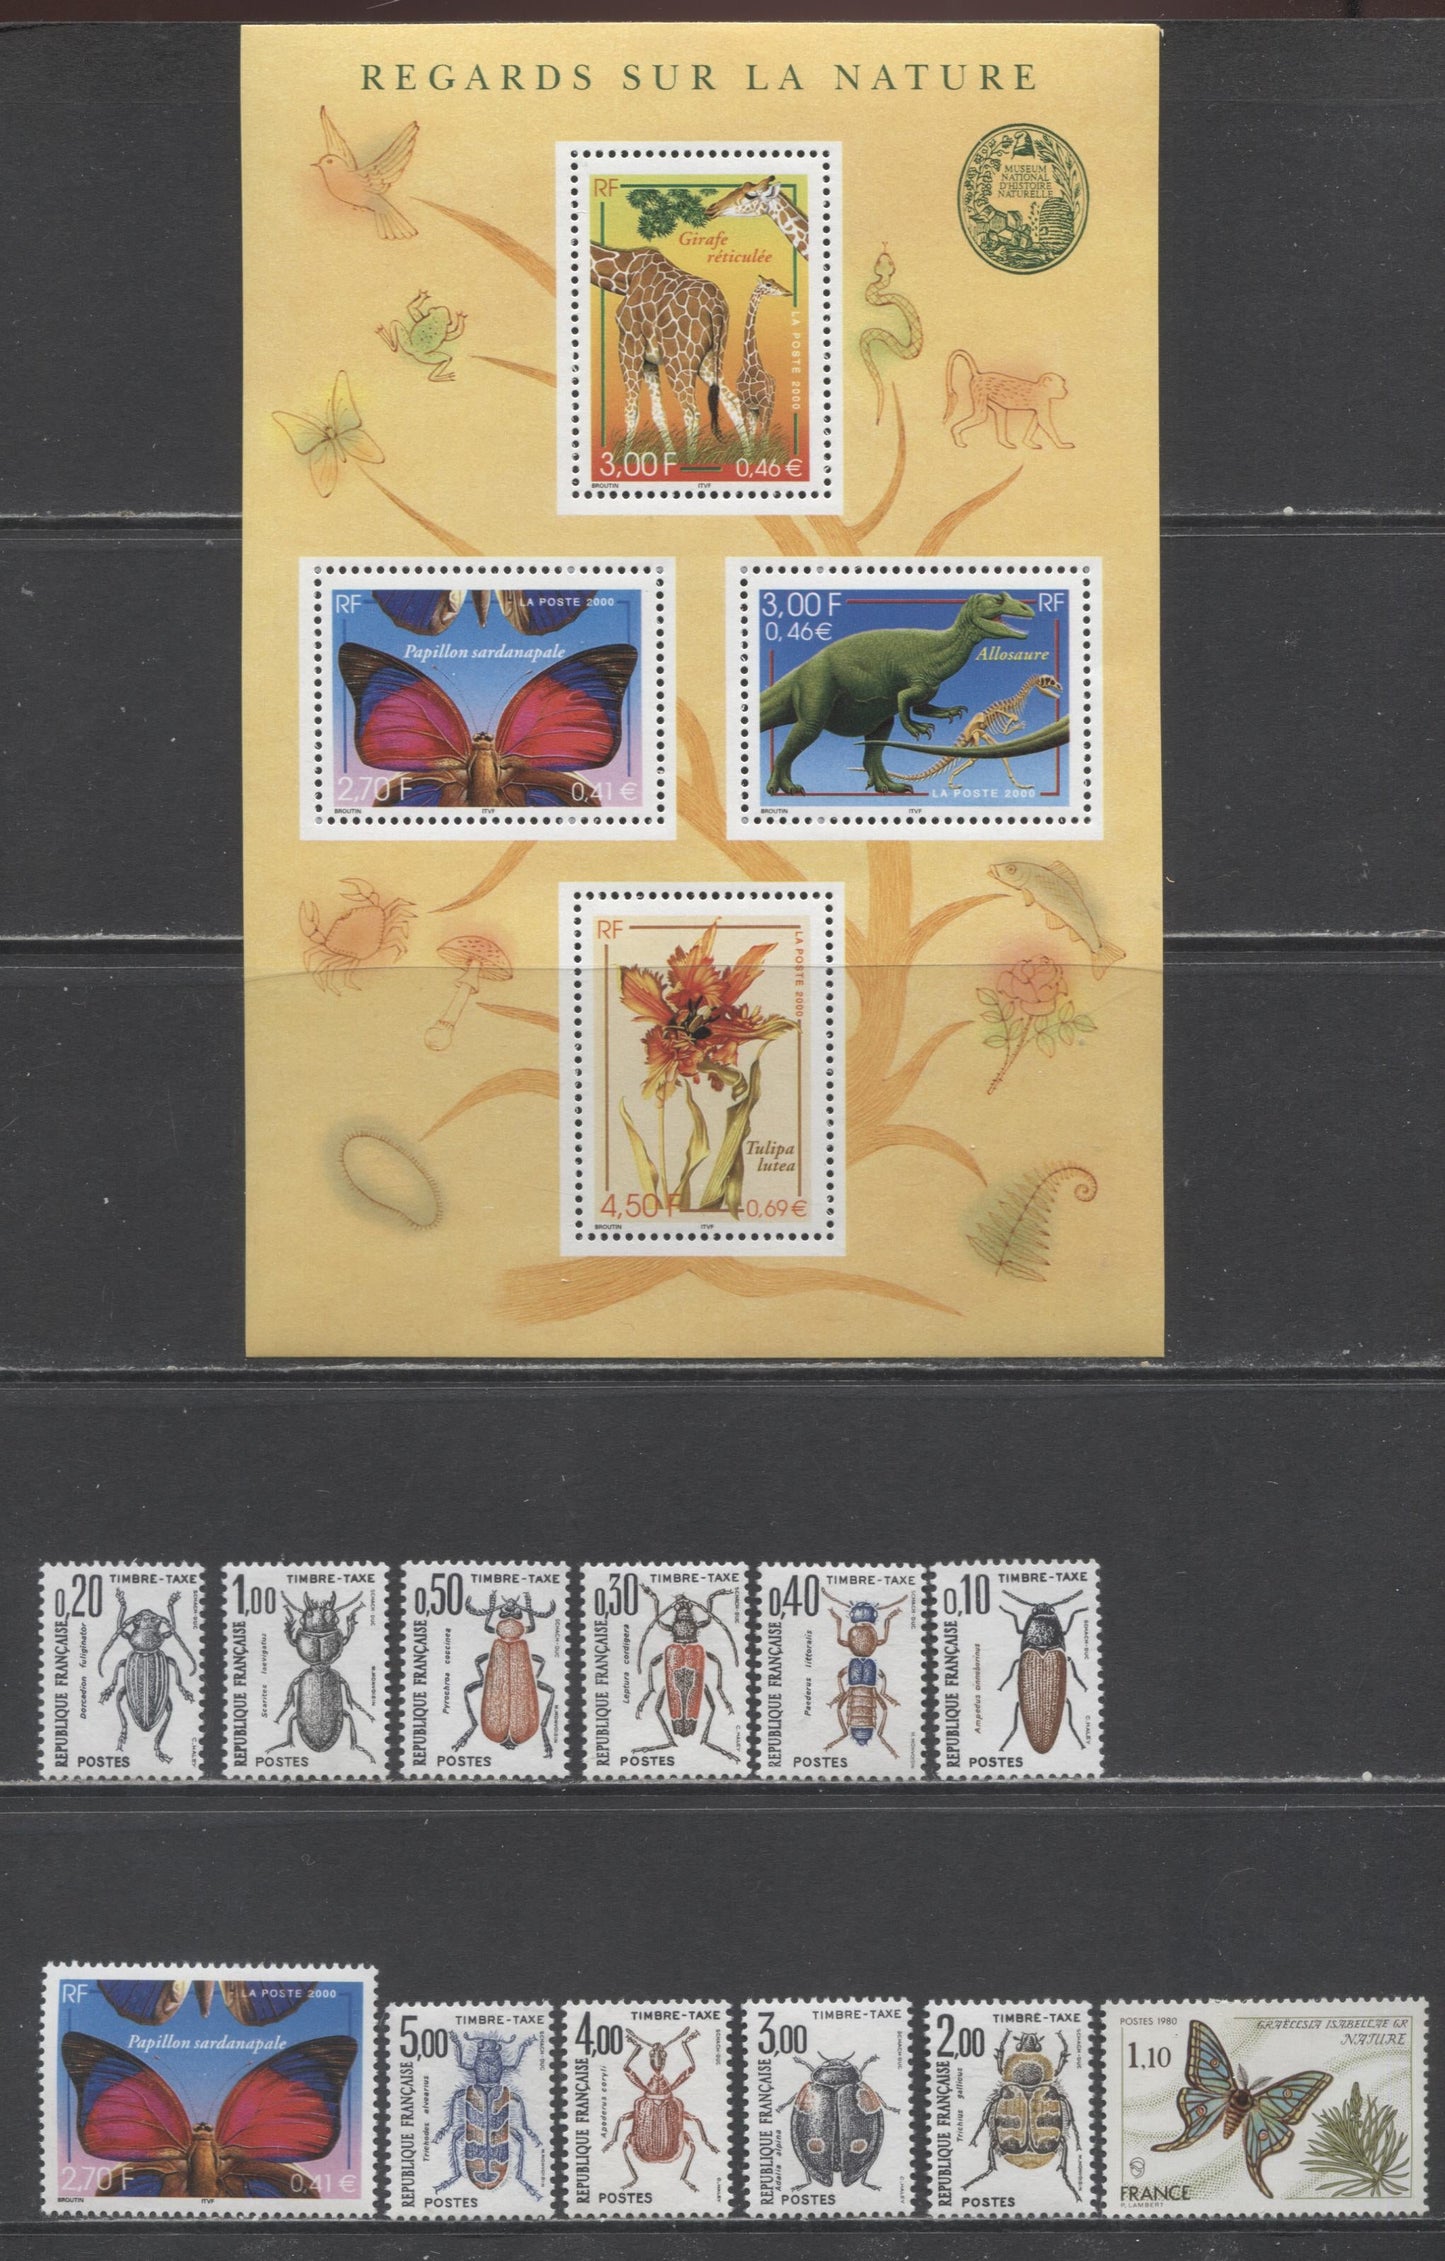 Lot 188 France SC#1708/J114 1980-1983 Butterfly & Insect Postage Dues, 12 VFNH/OG Singles & Souvenir Sheet, Click on Listing to See ALL Pictures, 2017 Scott Cat. $13.6